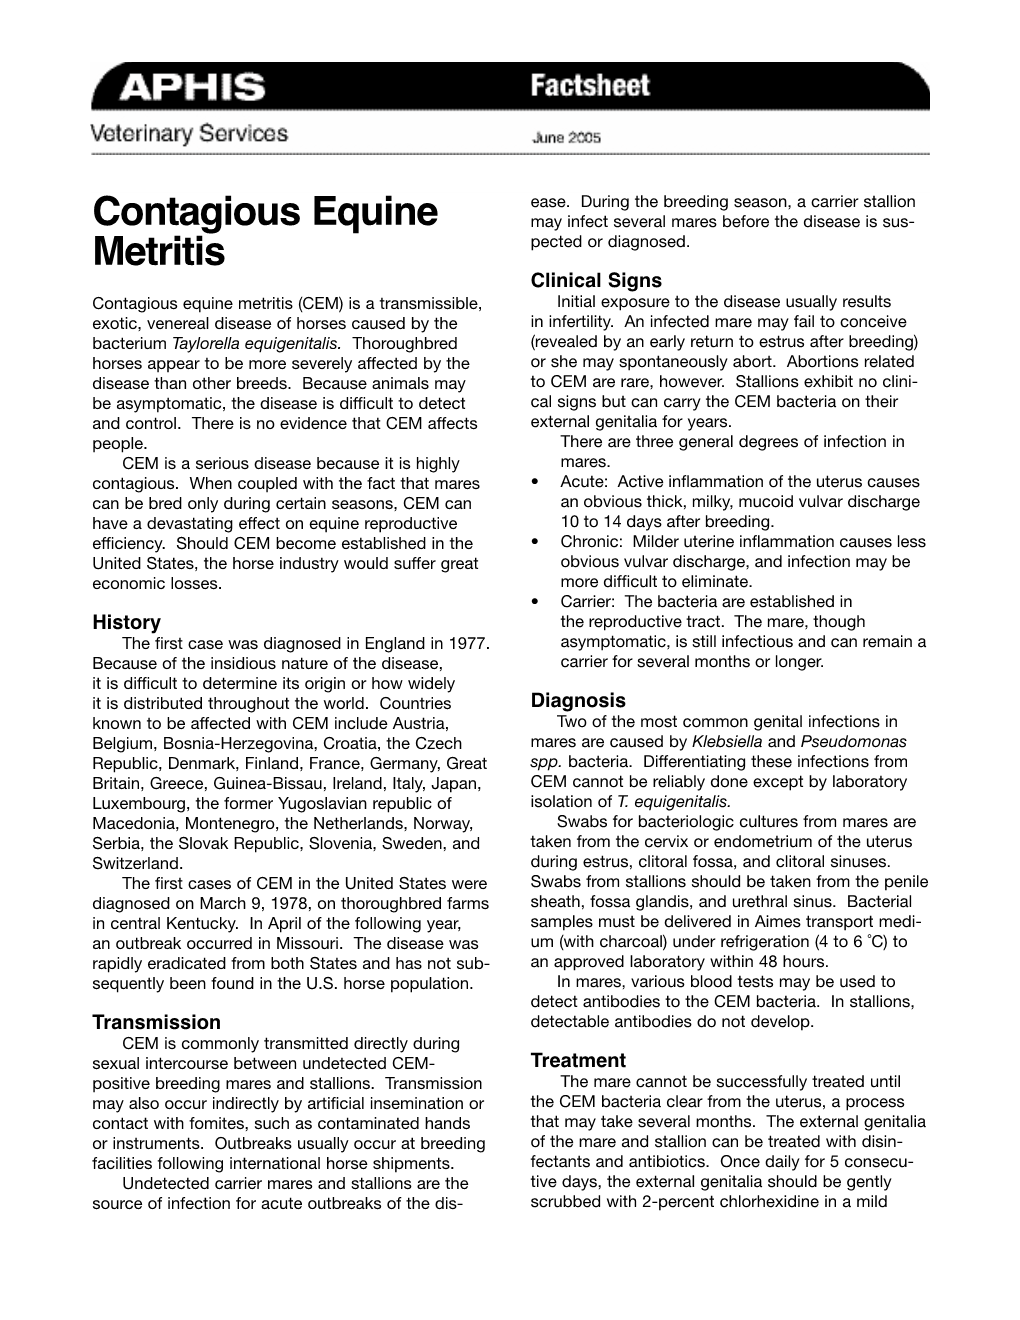 Contagious Equine Metritis (CEM) Is a Transmissible, Initial Exposure to the Disease Usually Results Exotic, Venereal Disease of Horses Caused by the in Infertility